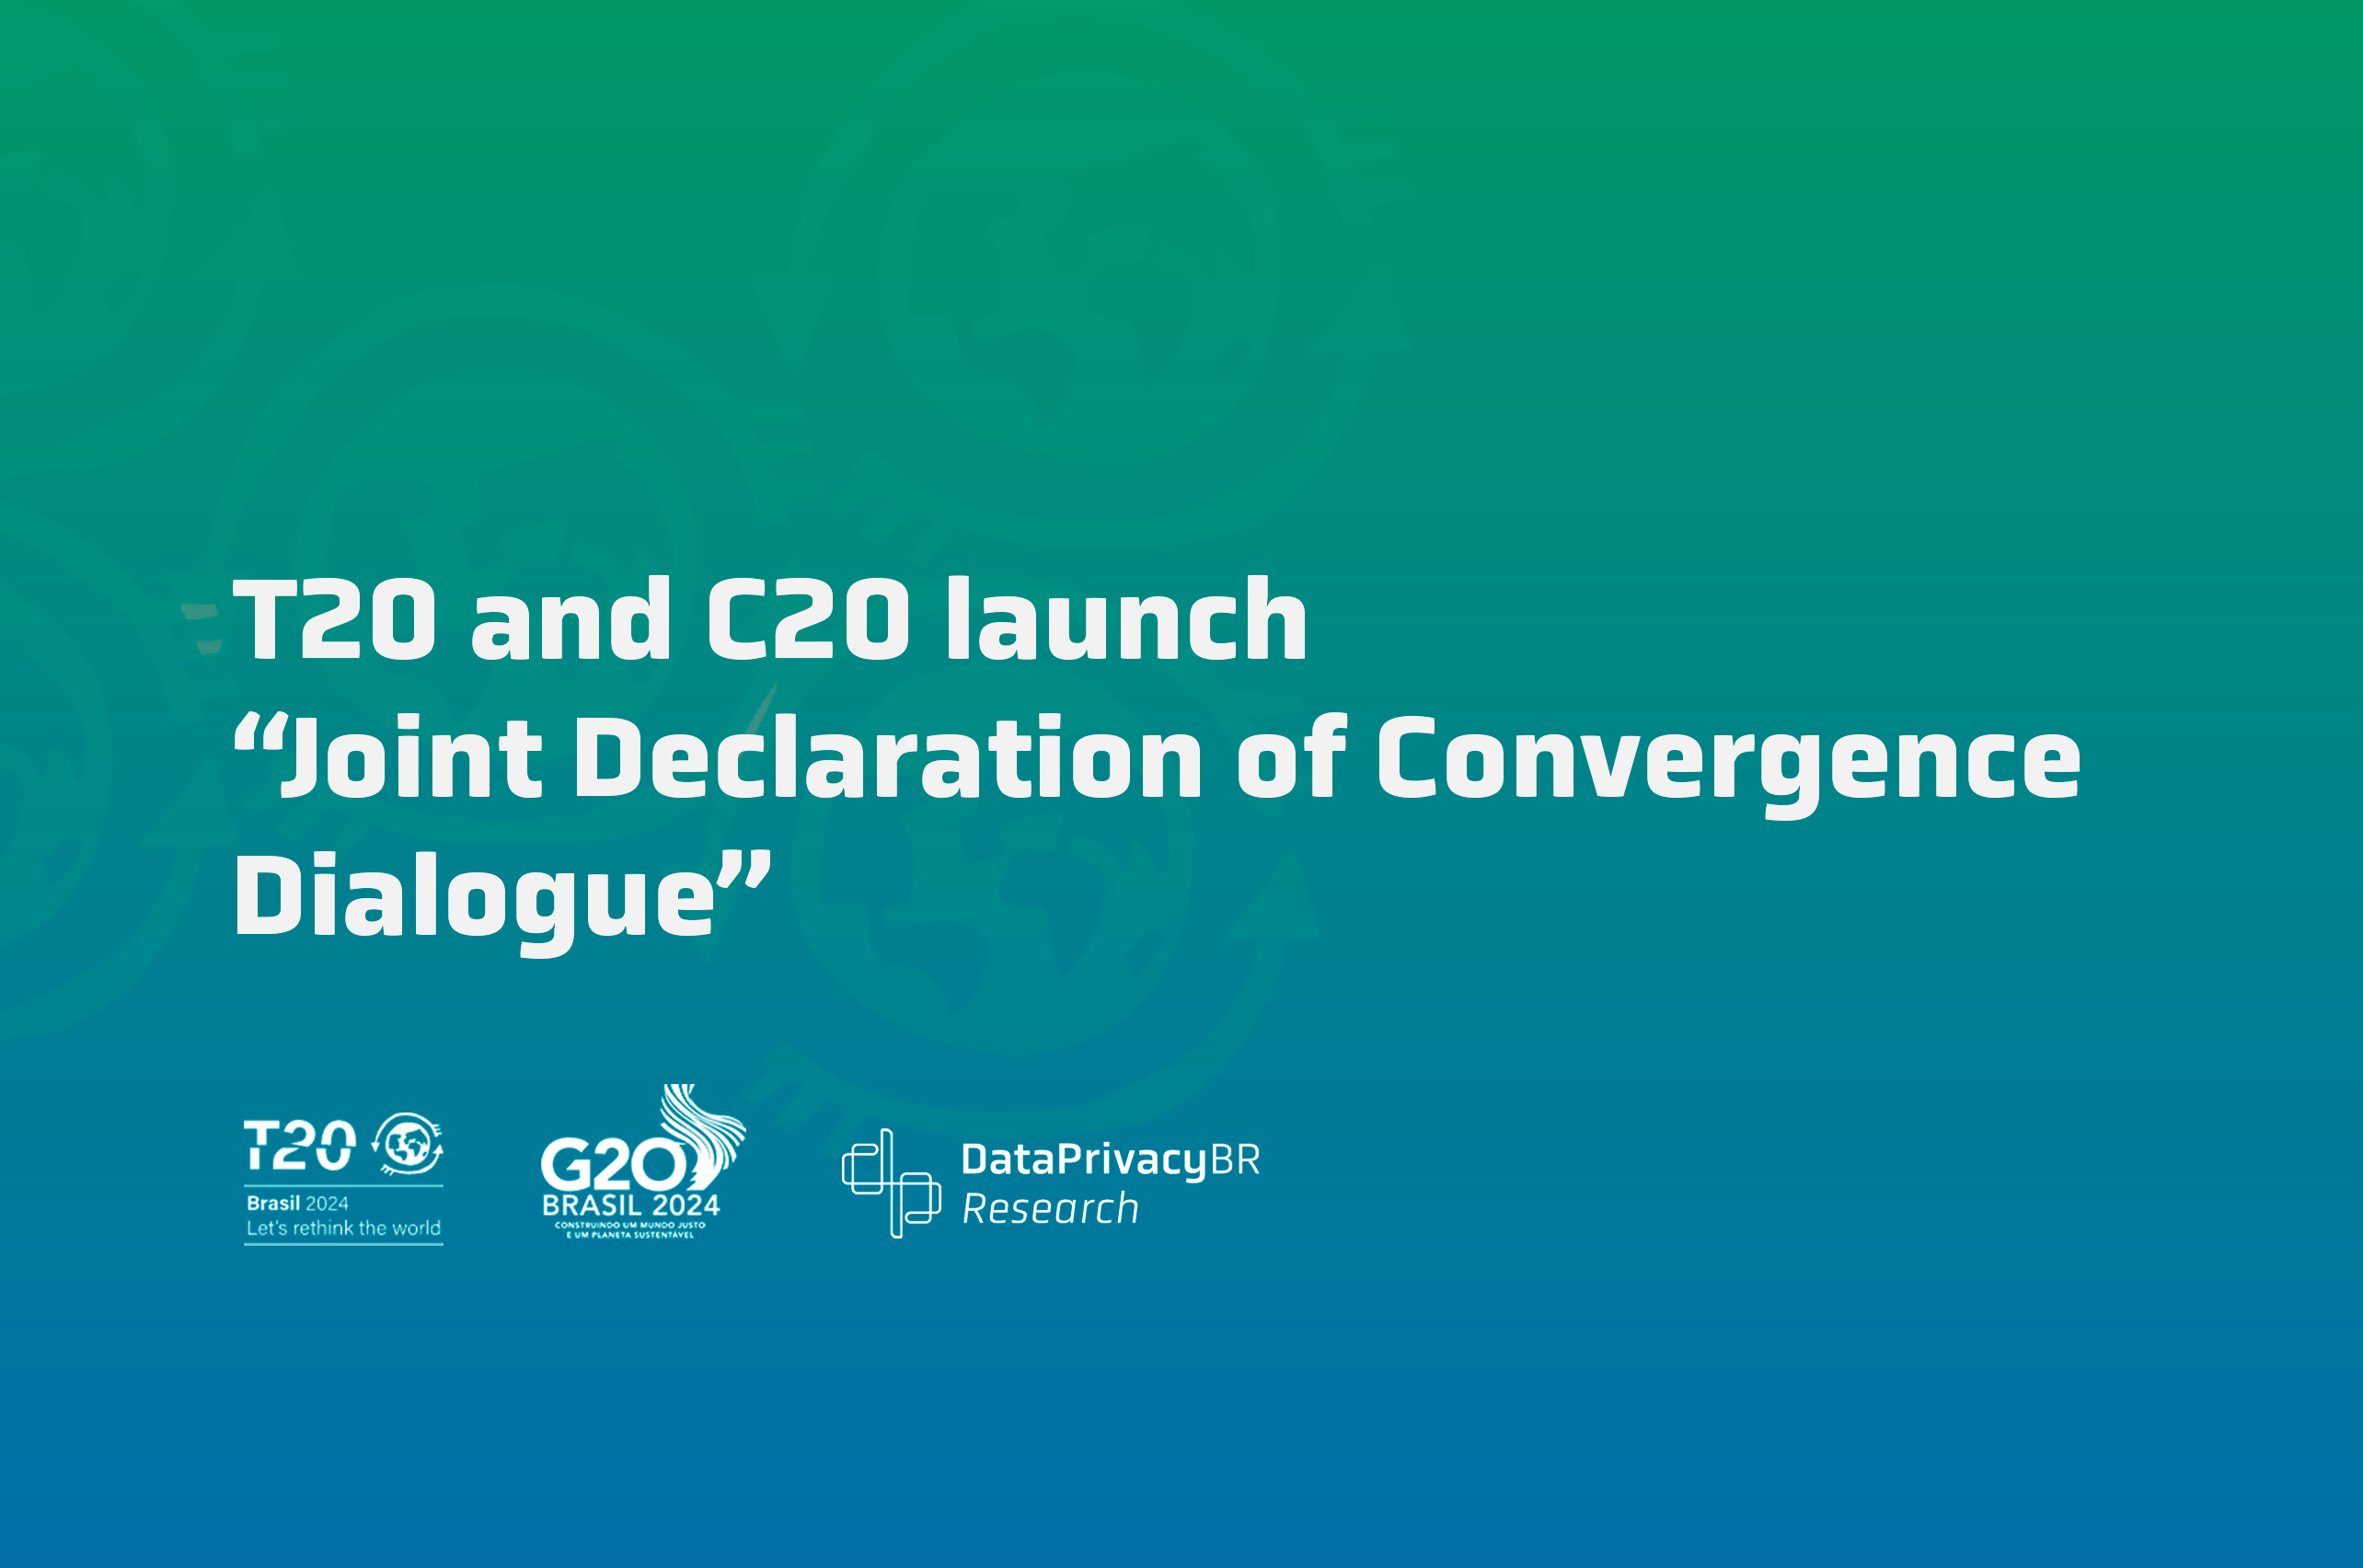 T20 and C20 launch “Joint Declaration of Convergence Dialogue”